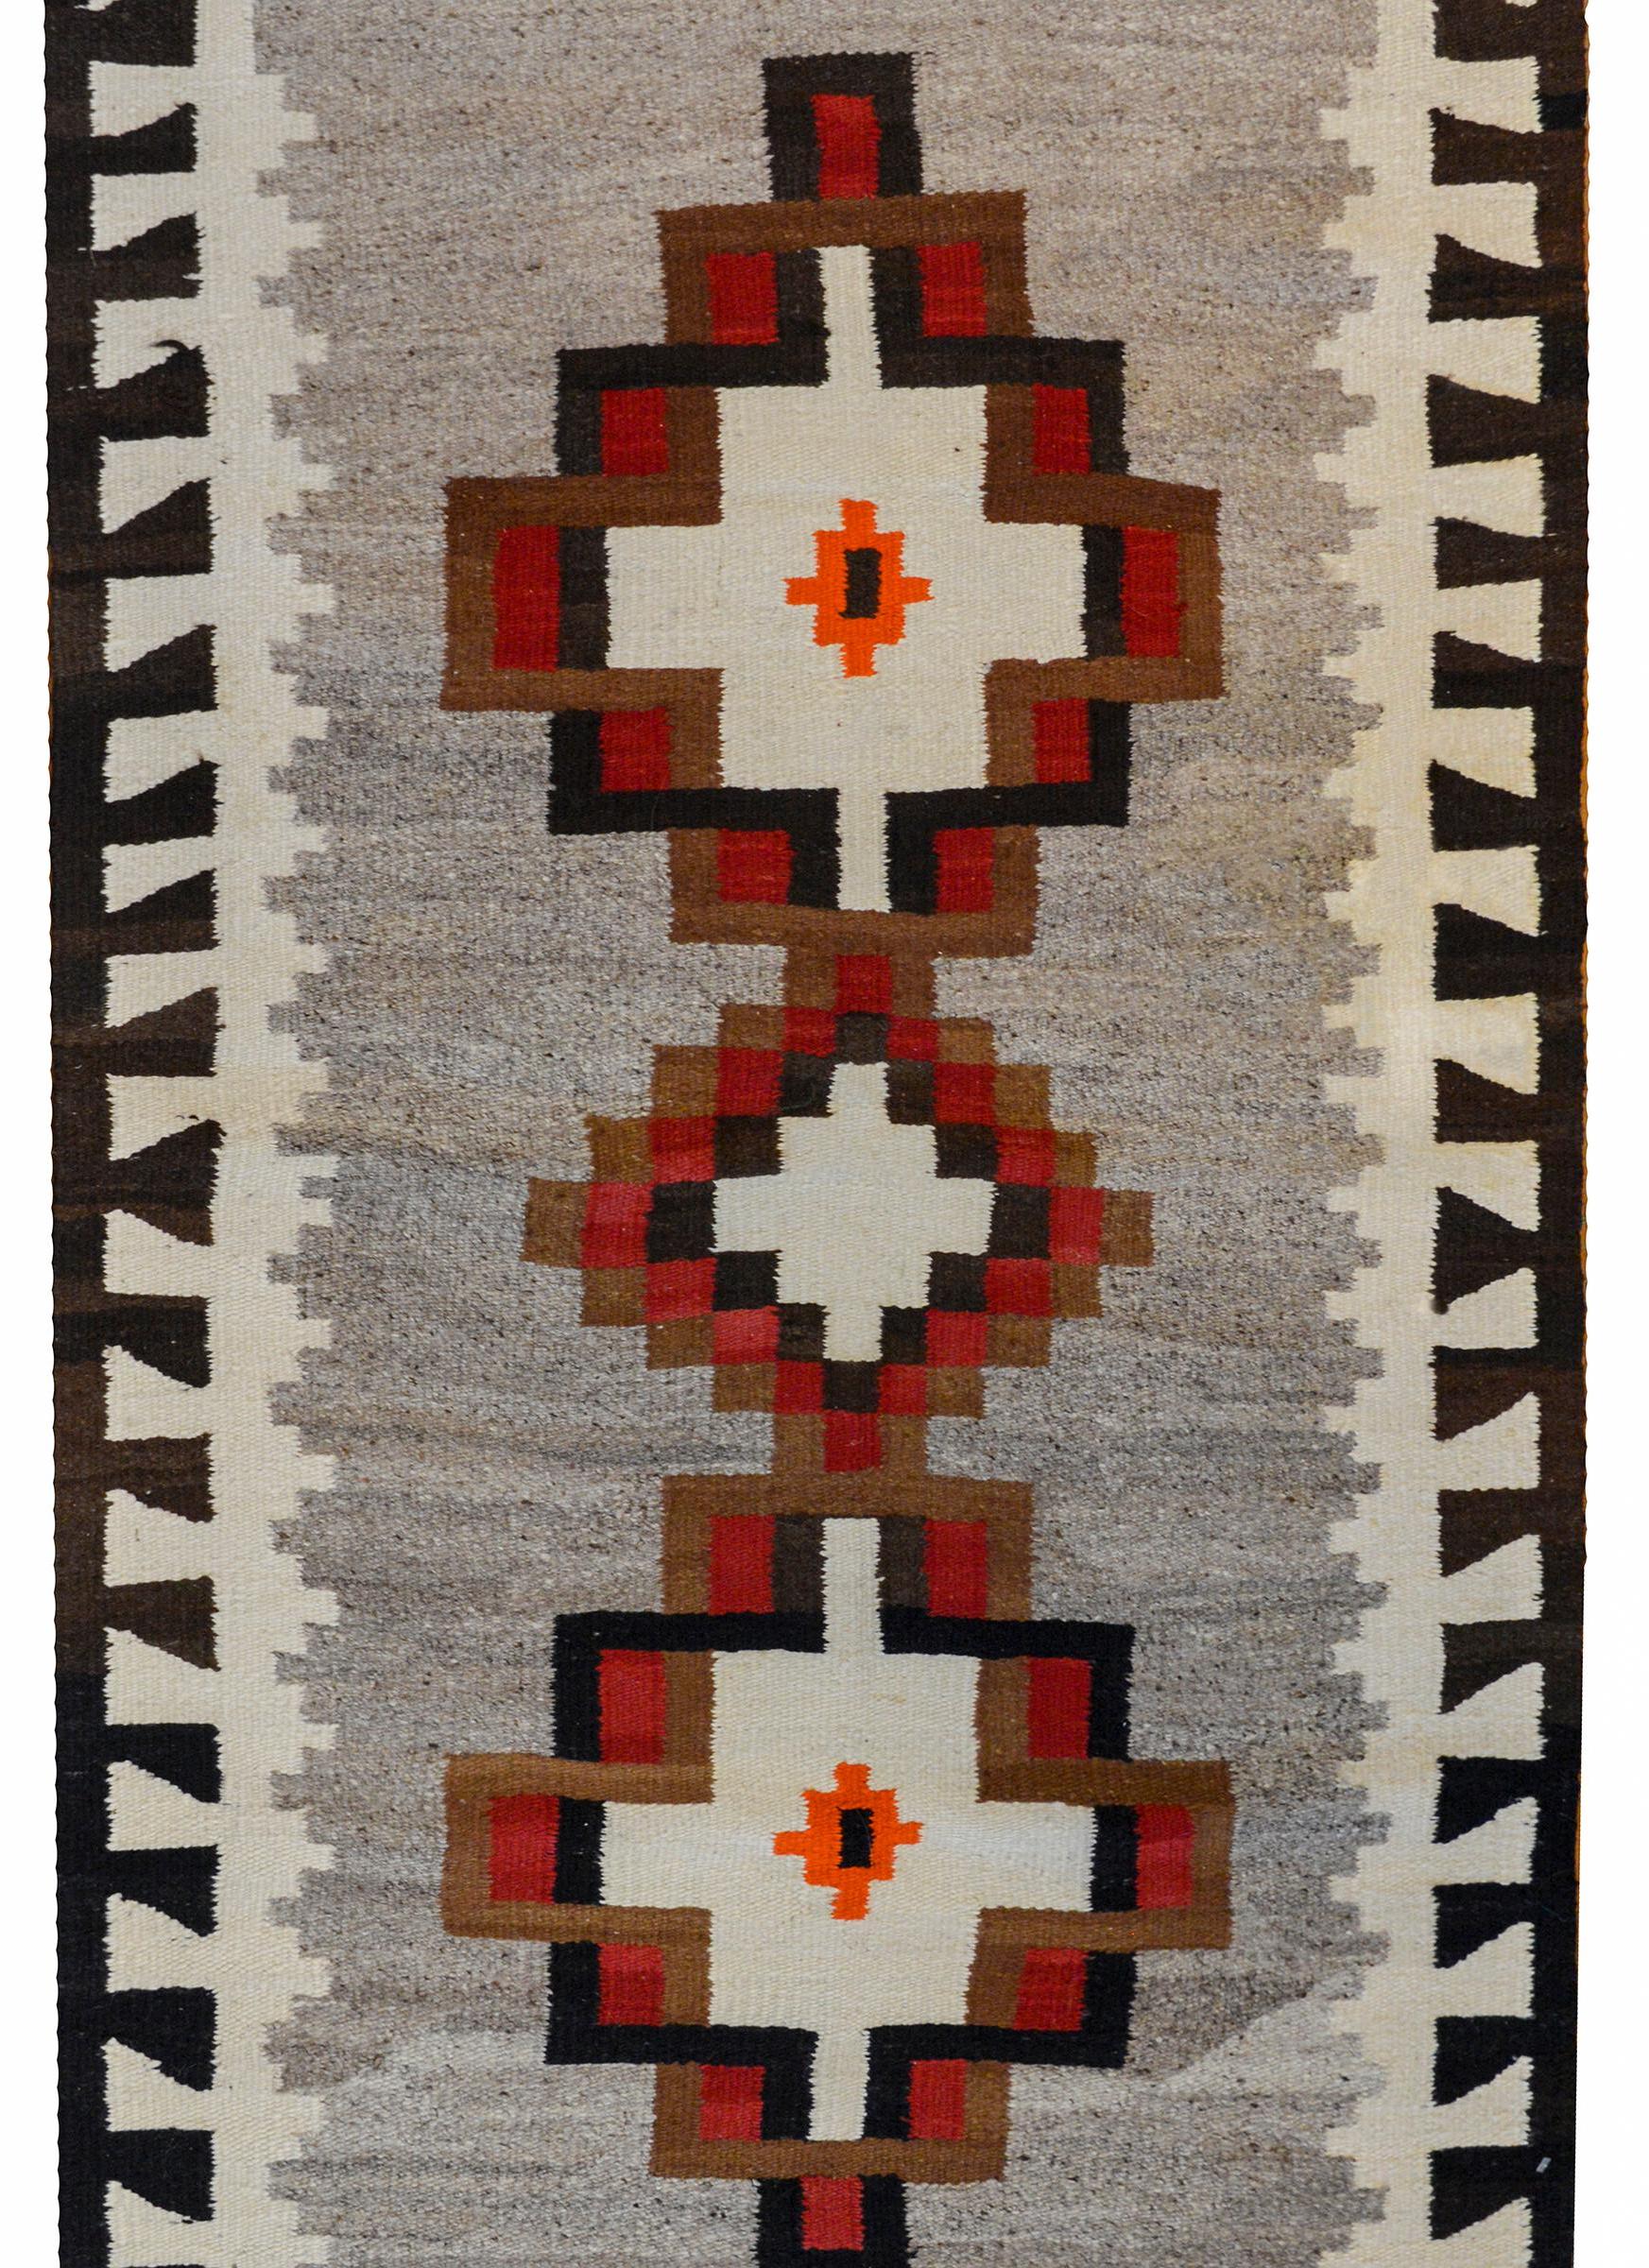 A striking early 20th century Navajo rug with two large diamond medallions flanking a smaller diamond medallion, all woven in crimson, brown, black, and white wool on a gray background. The border is wonderful with a geometric pattern woven in black